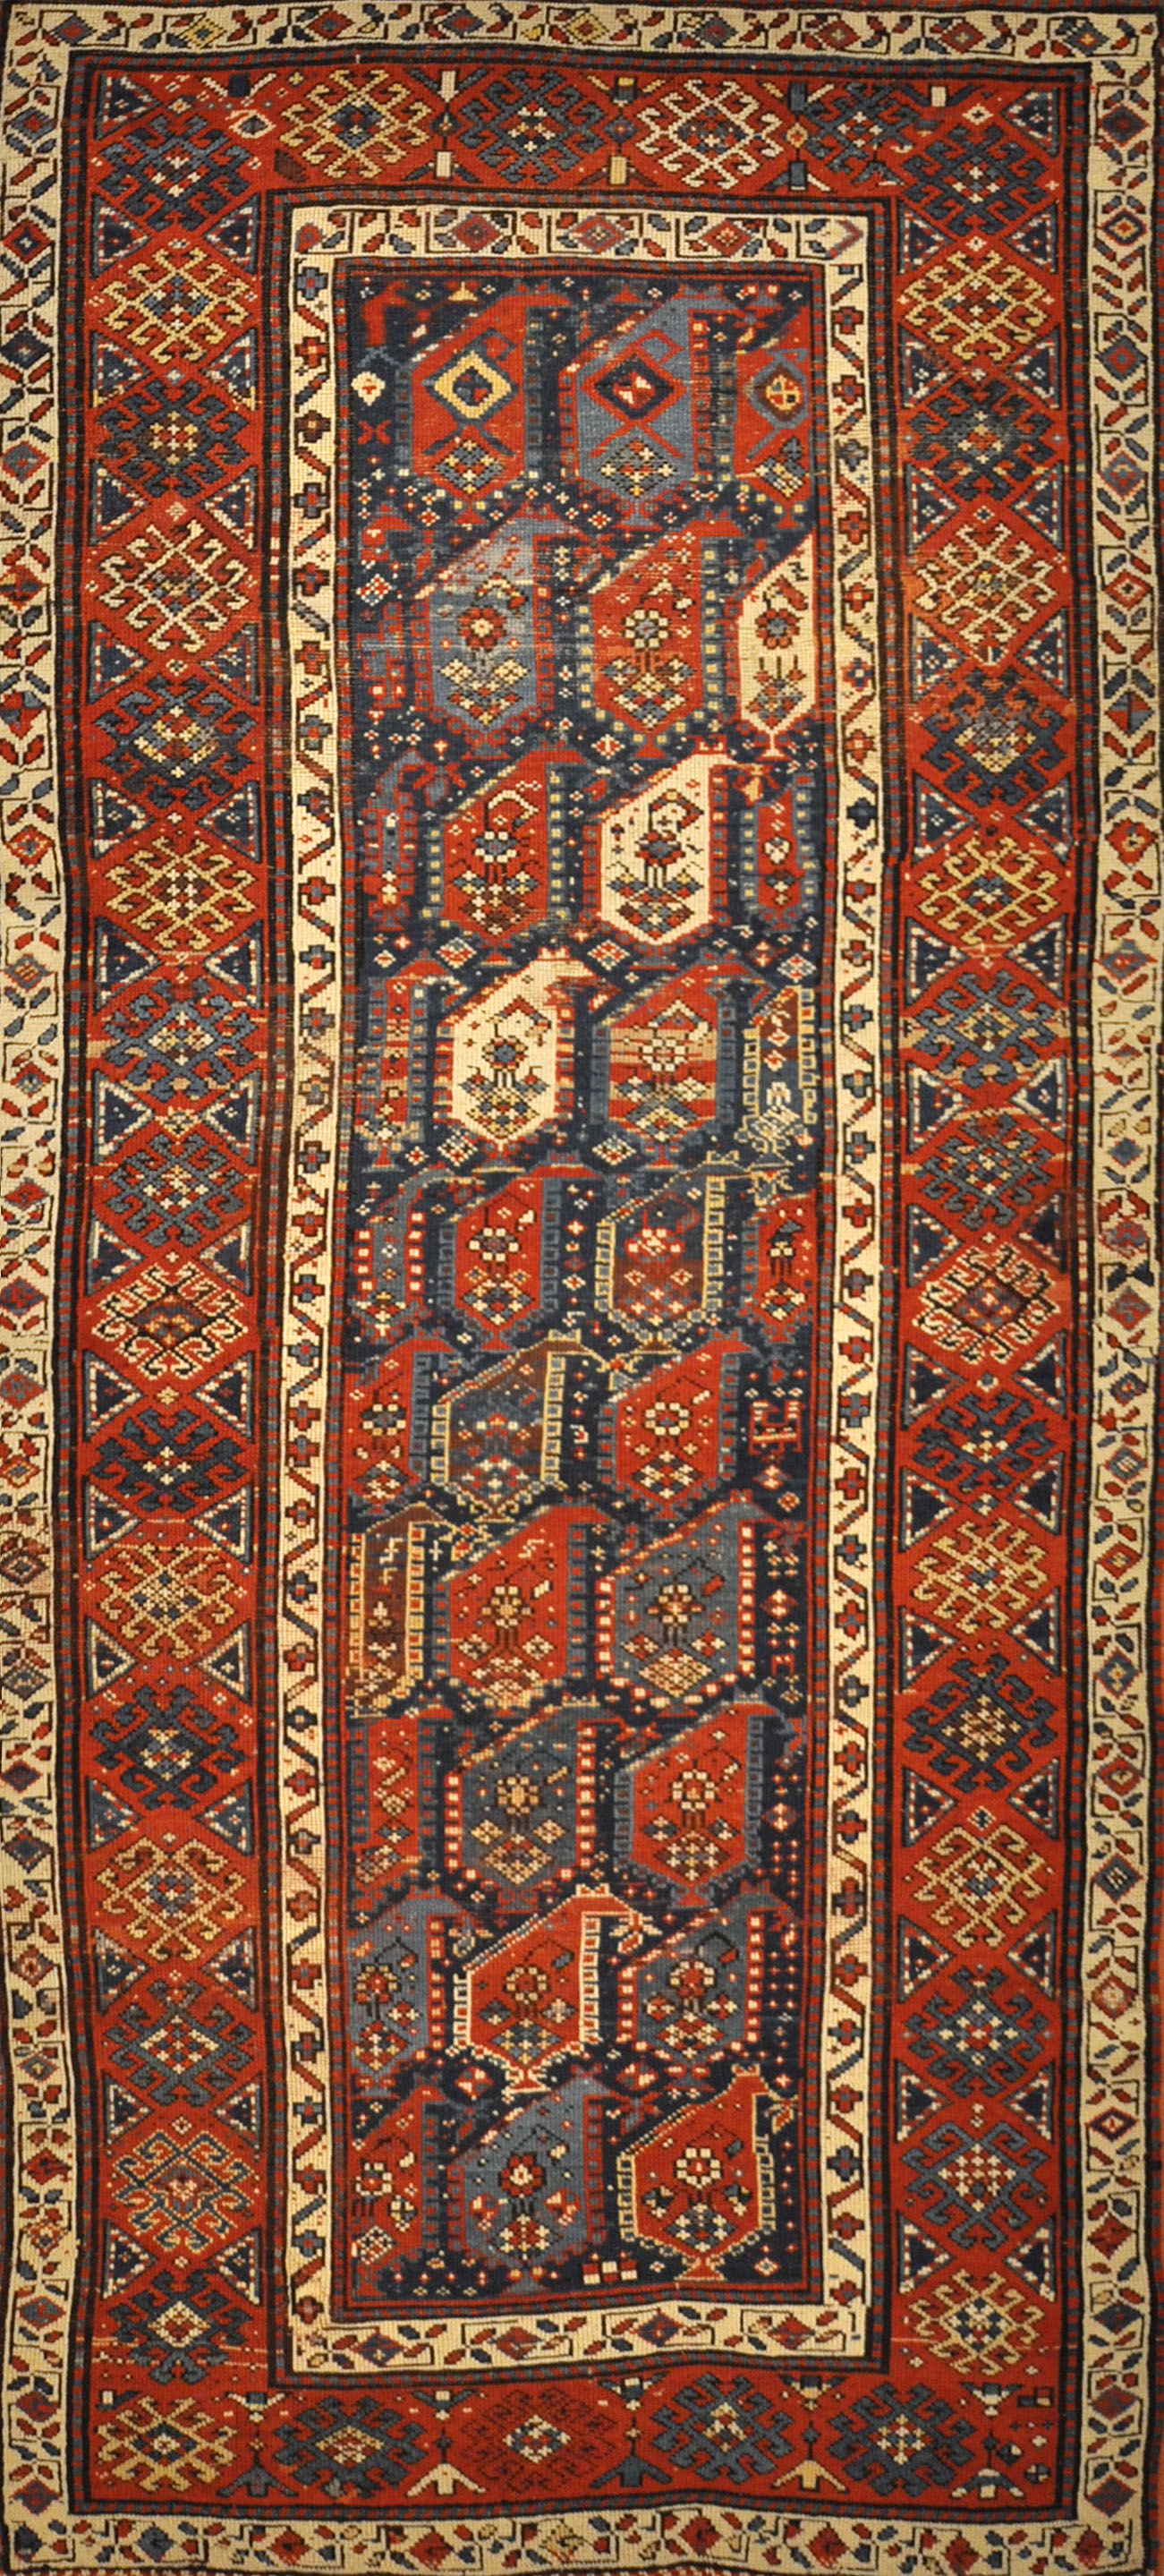 Antique Caucasian Botteh Rug 30343. A piece of genuine woven carpet art sold by Santa Barbara Design Center and Rugs and More.